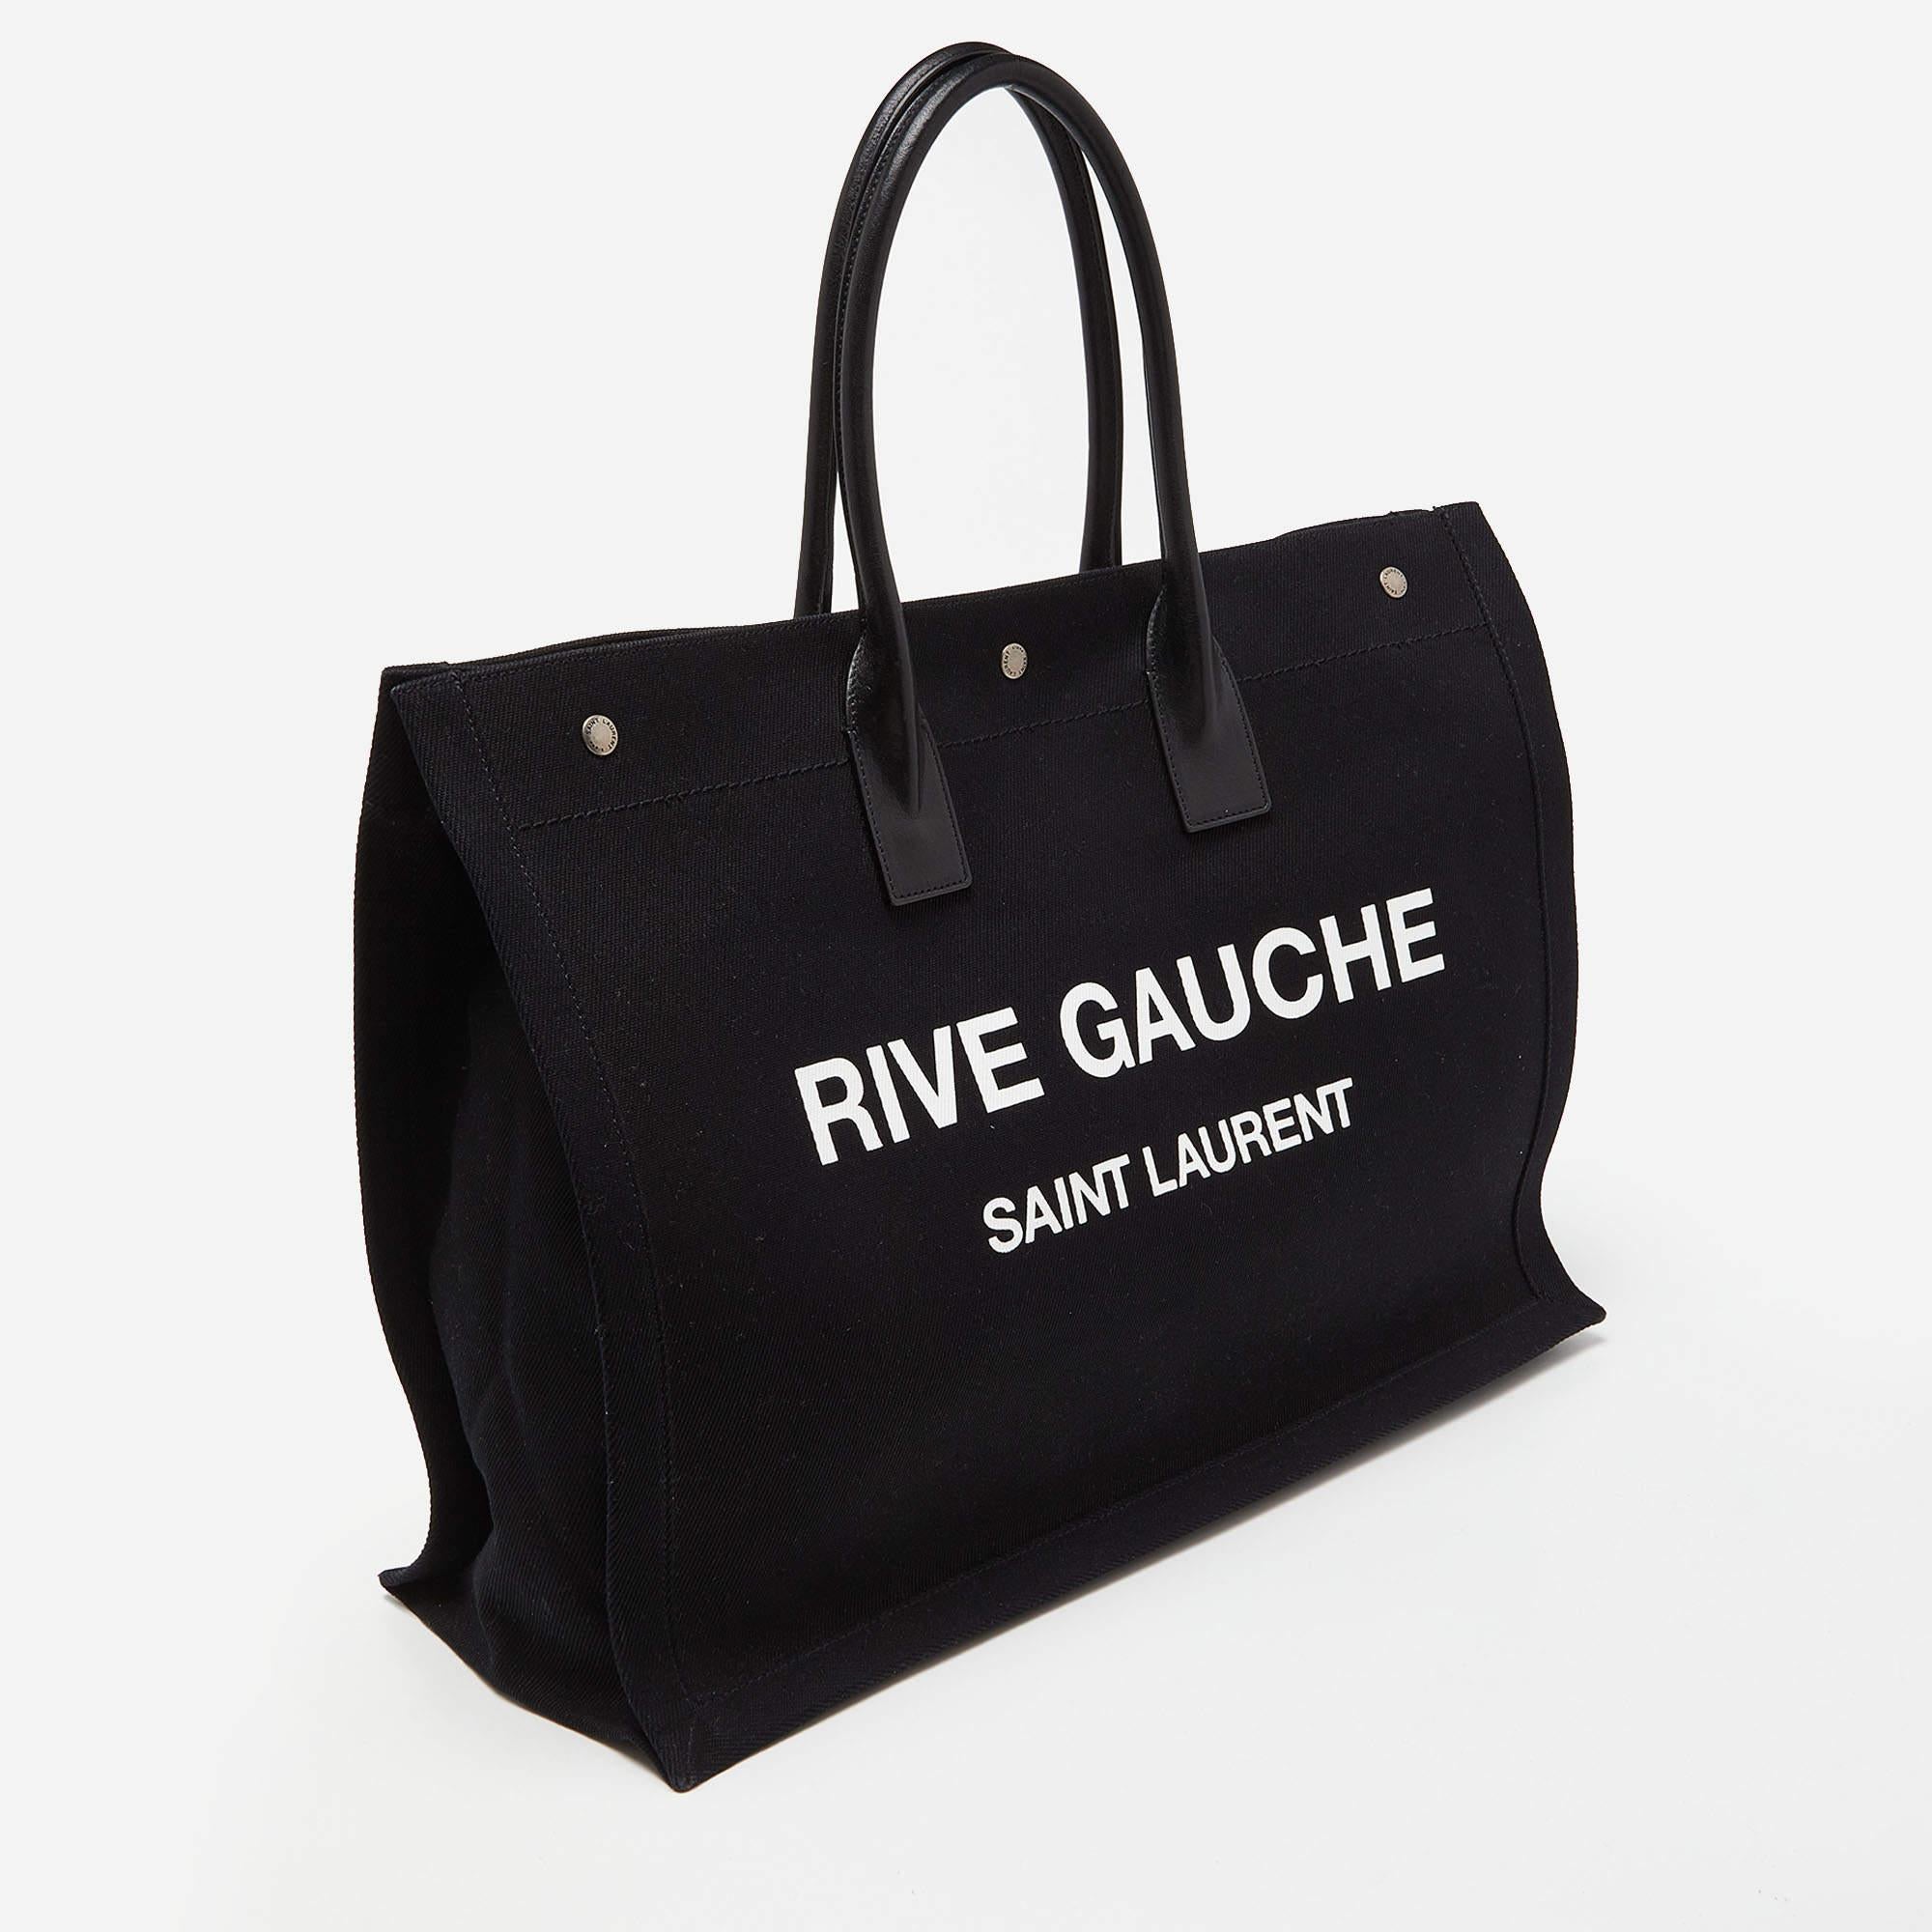 This Saint Laurent tote promises to take you through the day with ease, whether you're at work or out and about in the city. From its design to its structure, the canvas & leather bag promises charm and durability. It has top handles, 